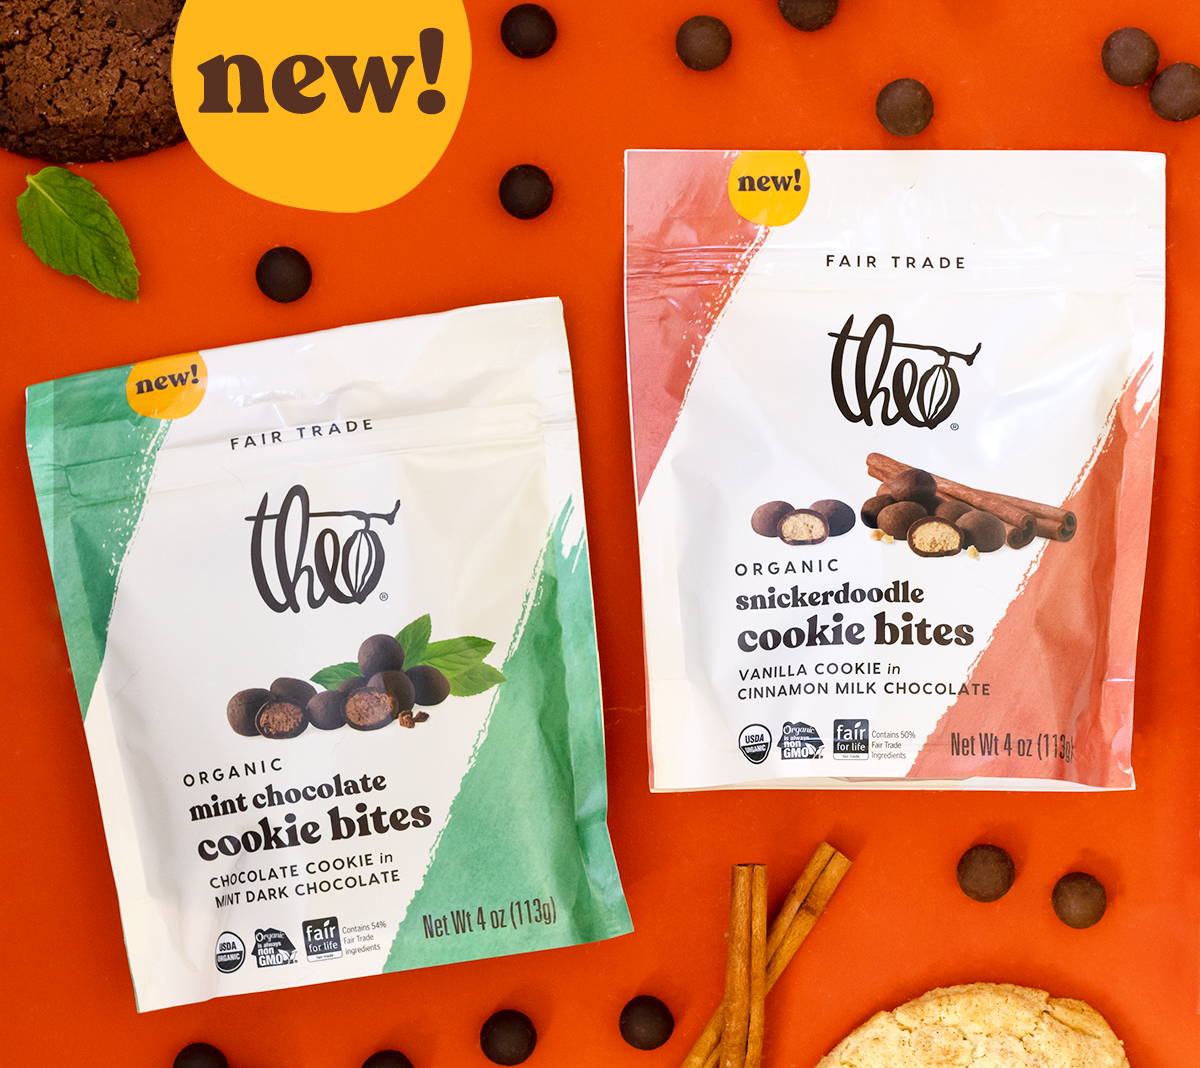 New Snickerdoodle and Mint Chocolate Cookie Bites from Theo Chocolate.